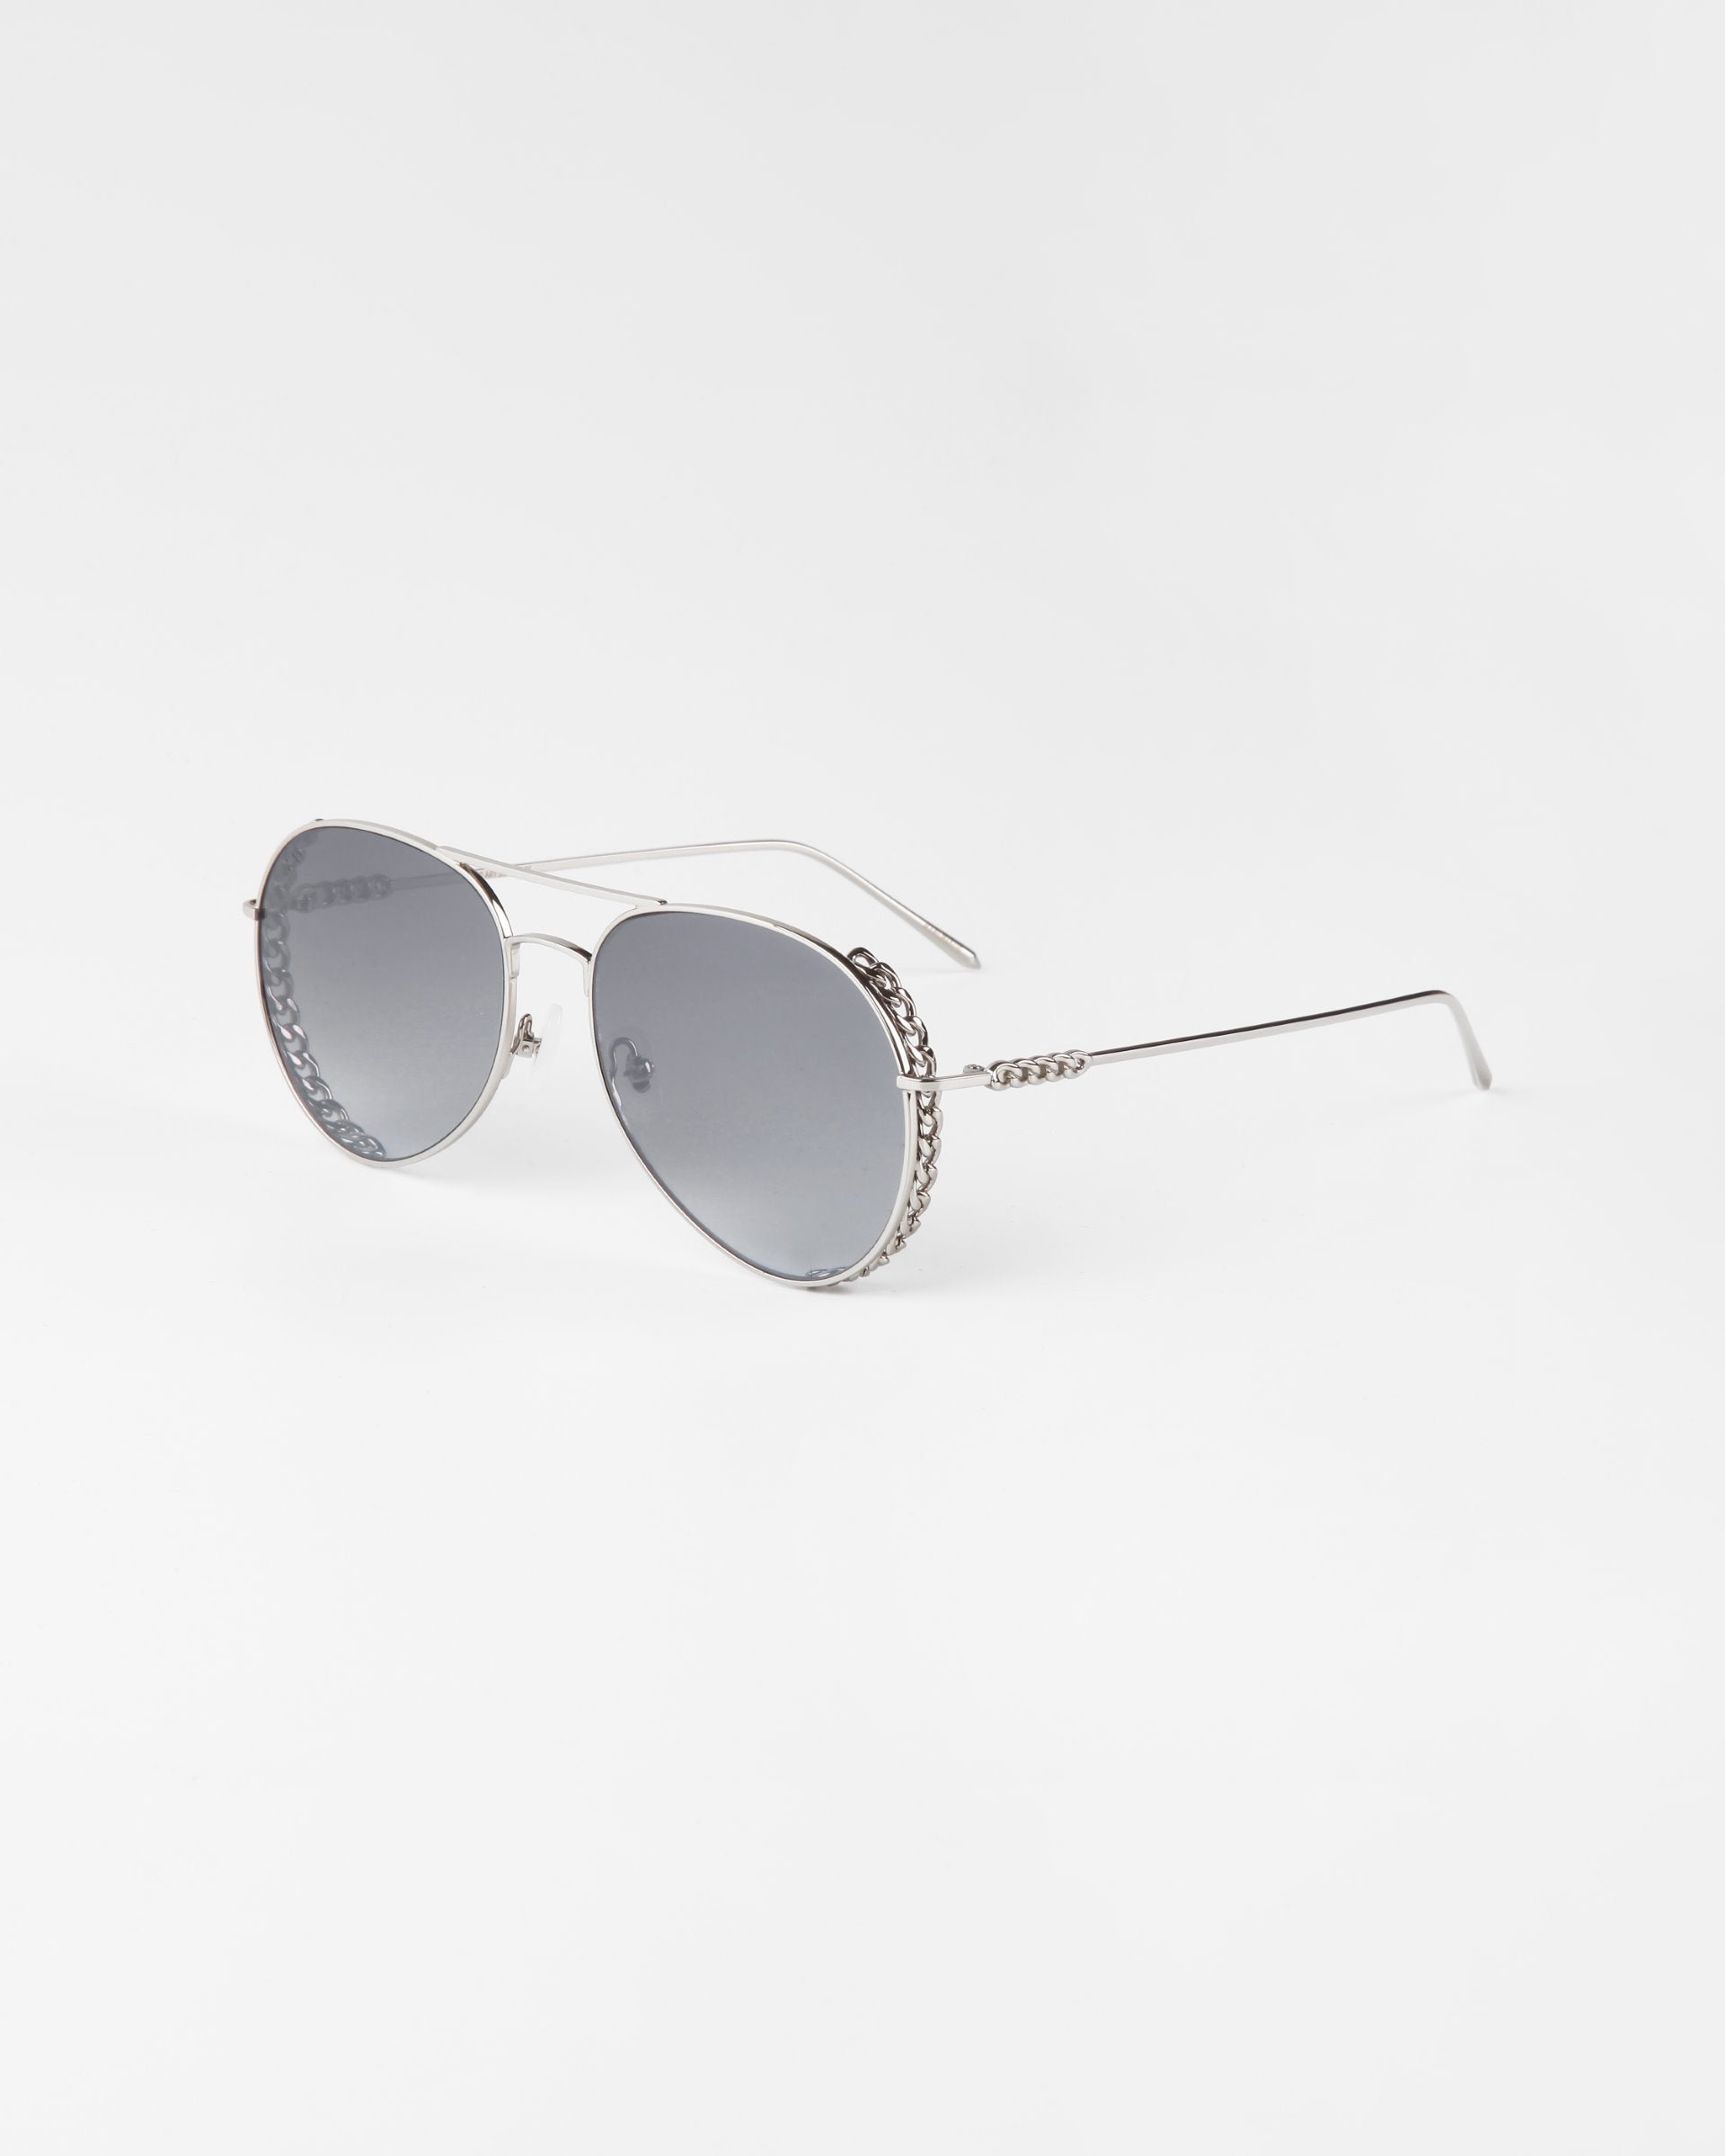 A pair of stylish Links aviator sunglasses by For Art&#39;s Sake® with gold-plated stainless steel frames and gradient nylon lenses is displayed on a plain white background. The Links sunglasses have thin metal arms and intricate detailing on the bridge and temples.